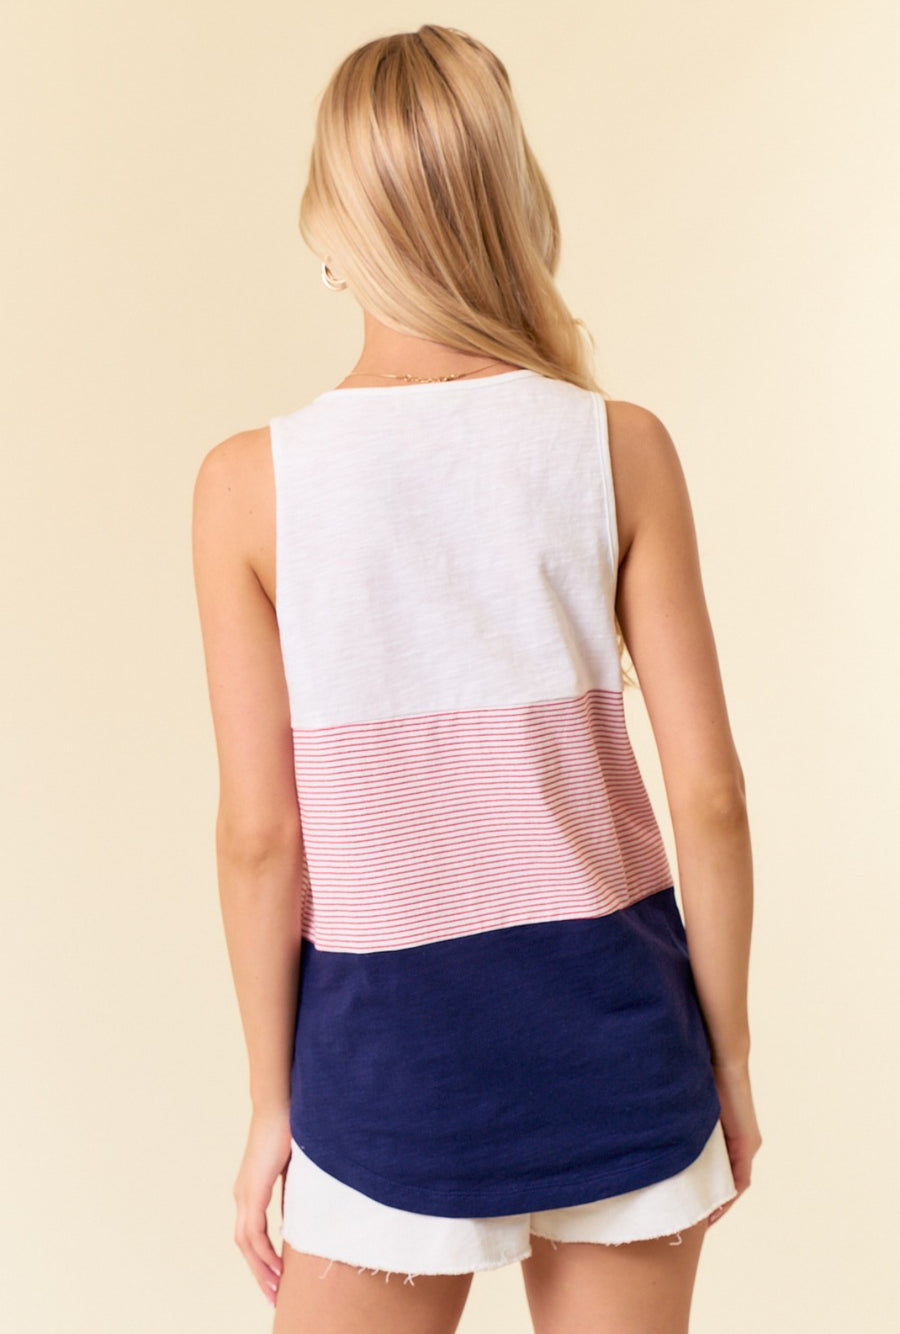 Red/White/Blue Color Block Tank